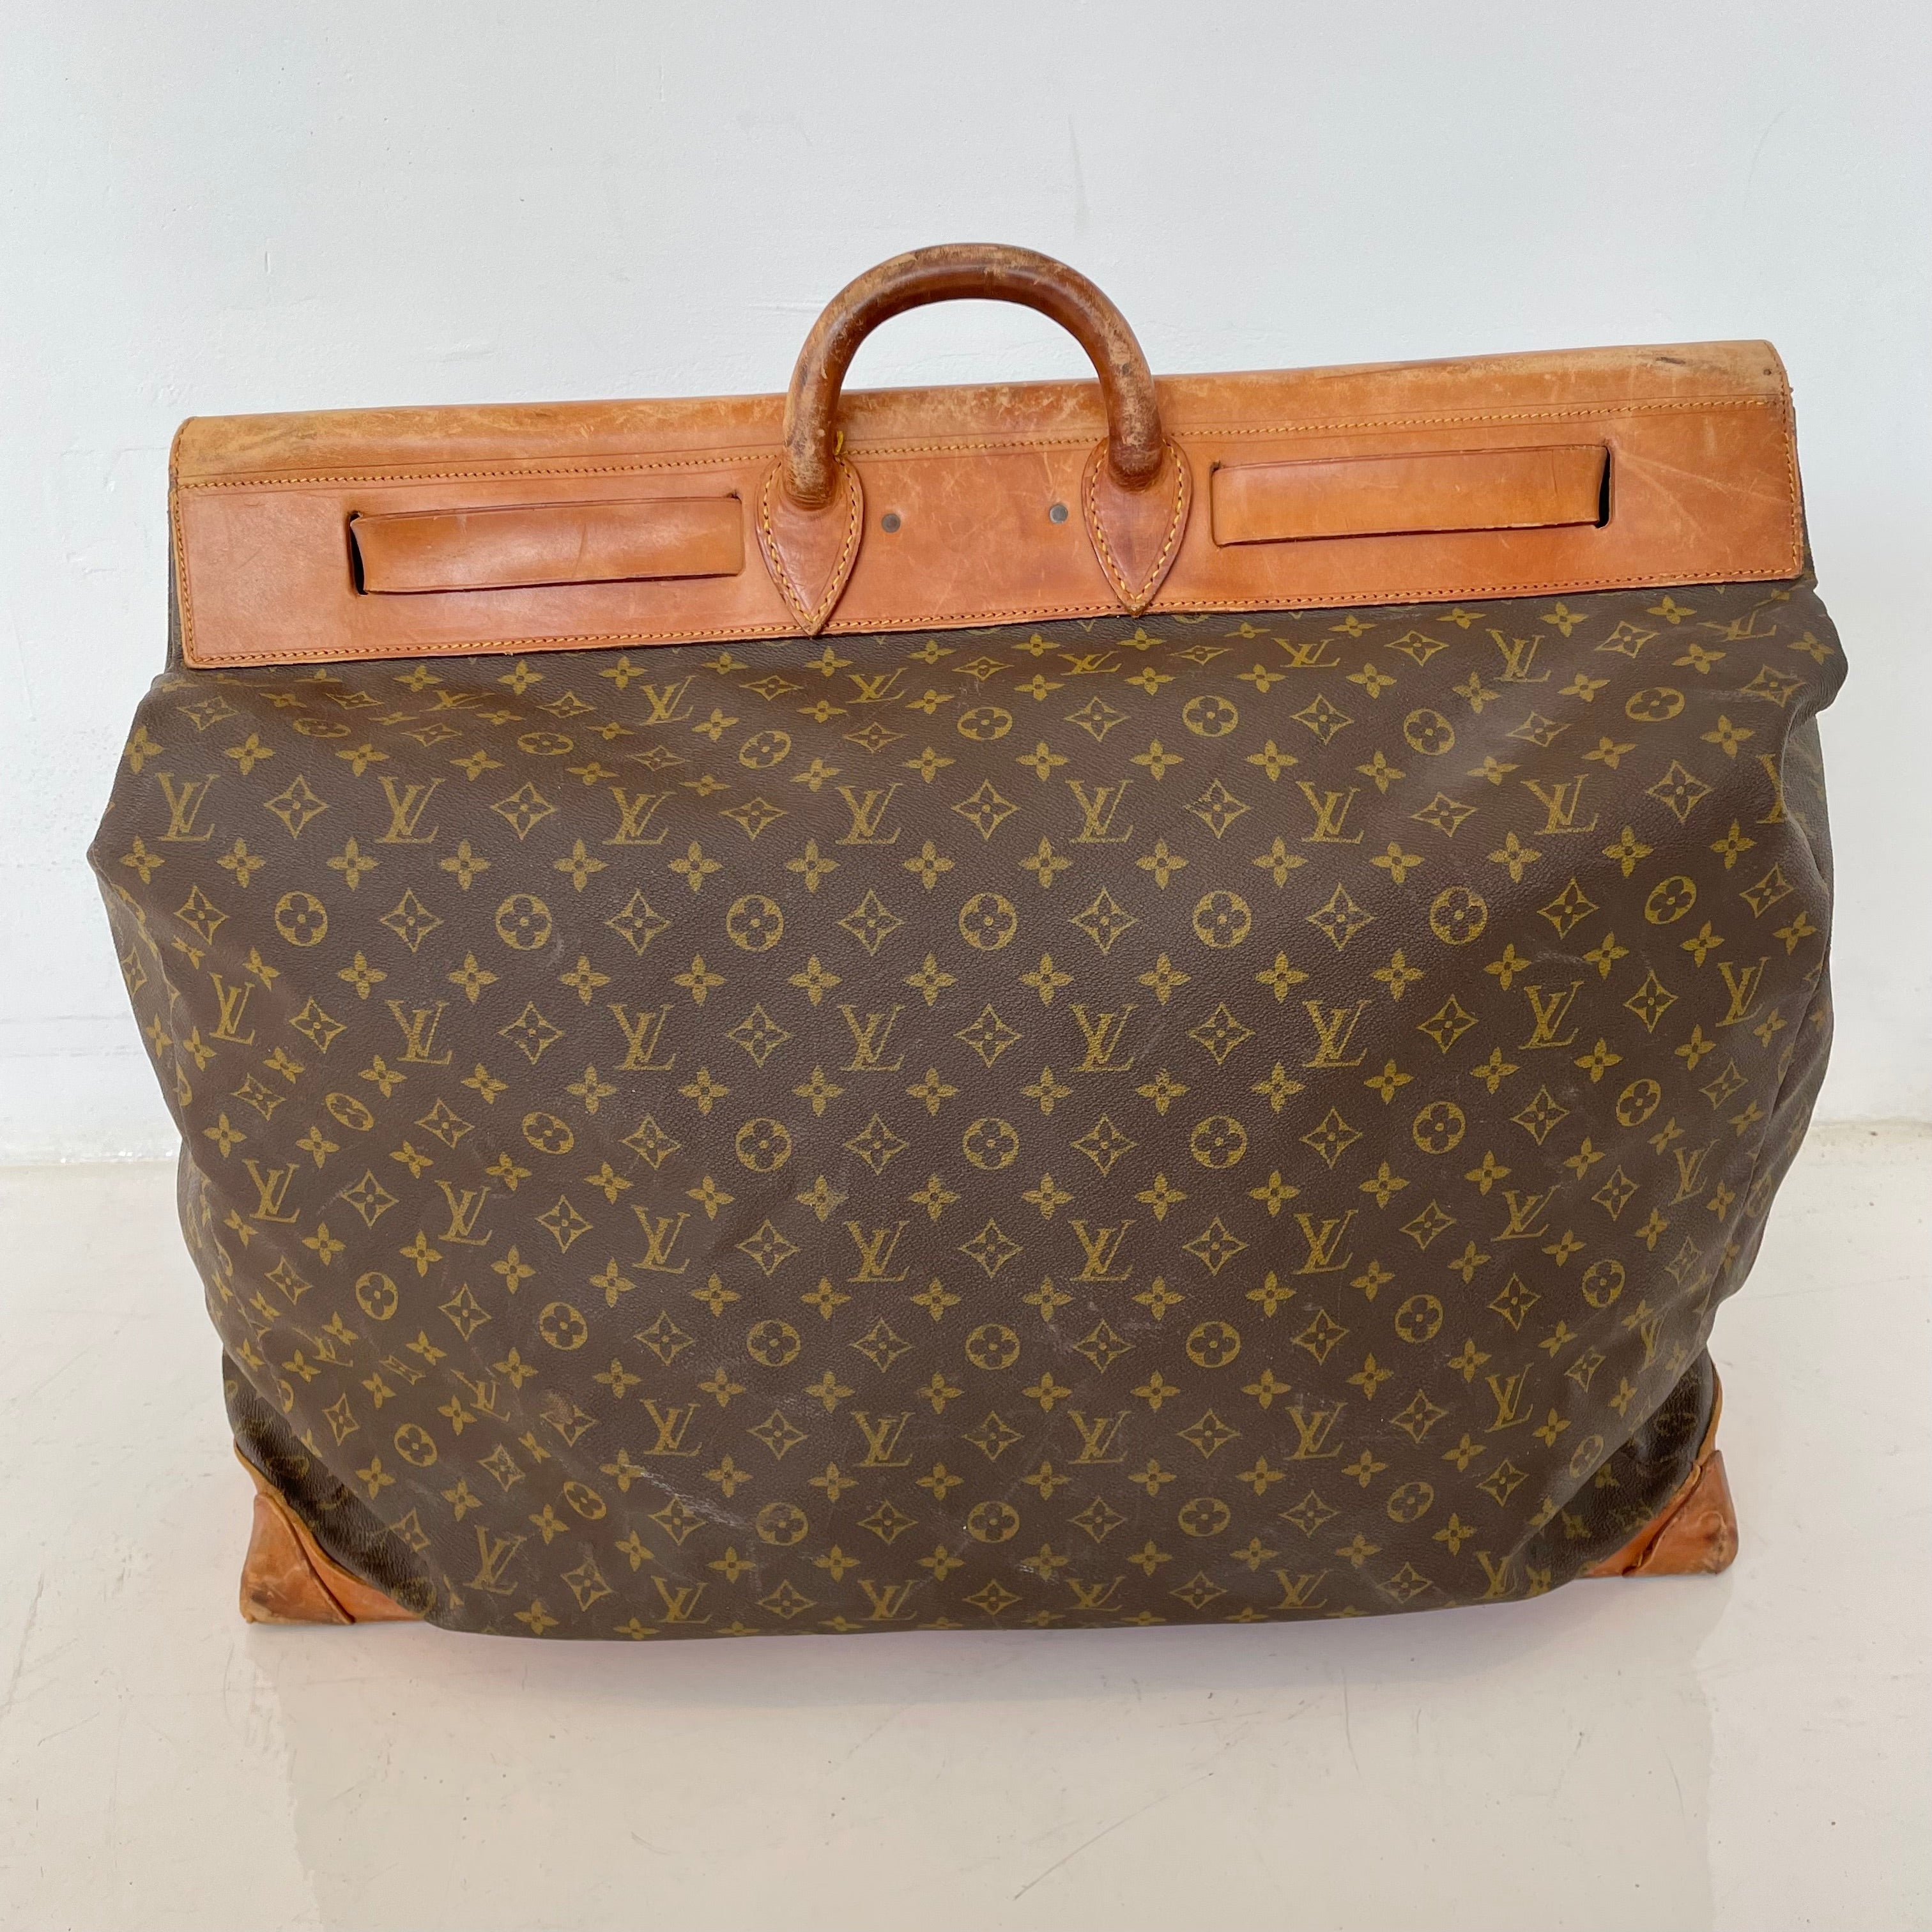 Rare giant Louis Vuitton 65cm Steamer well traveled great patina